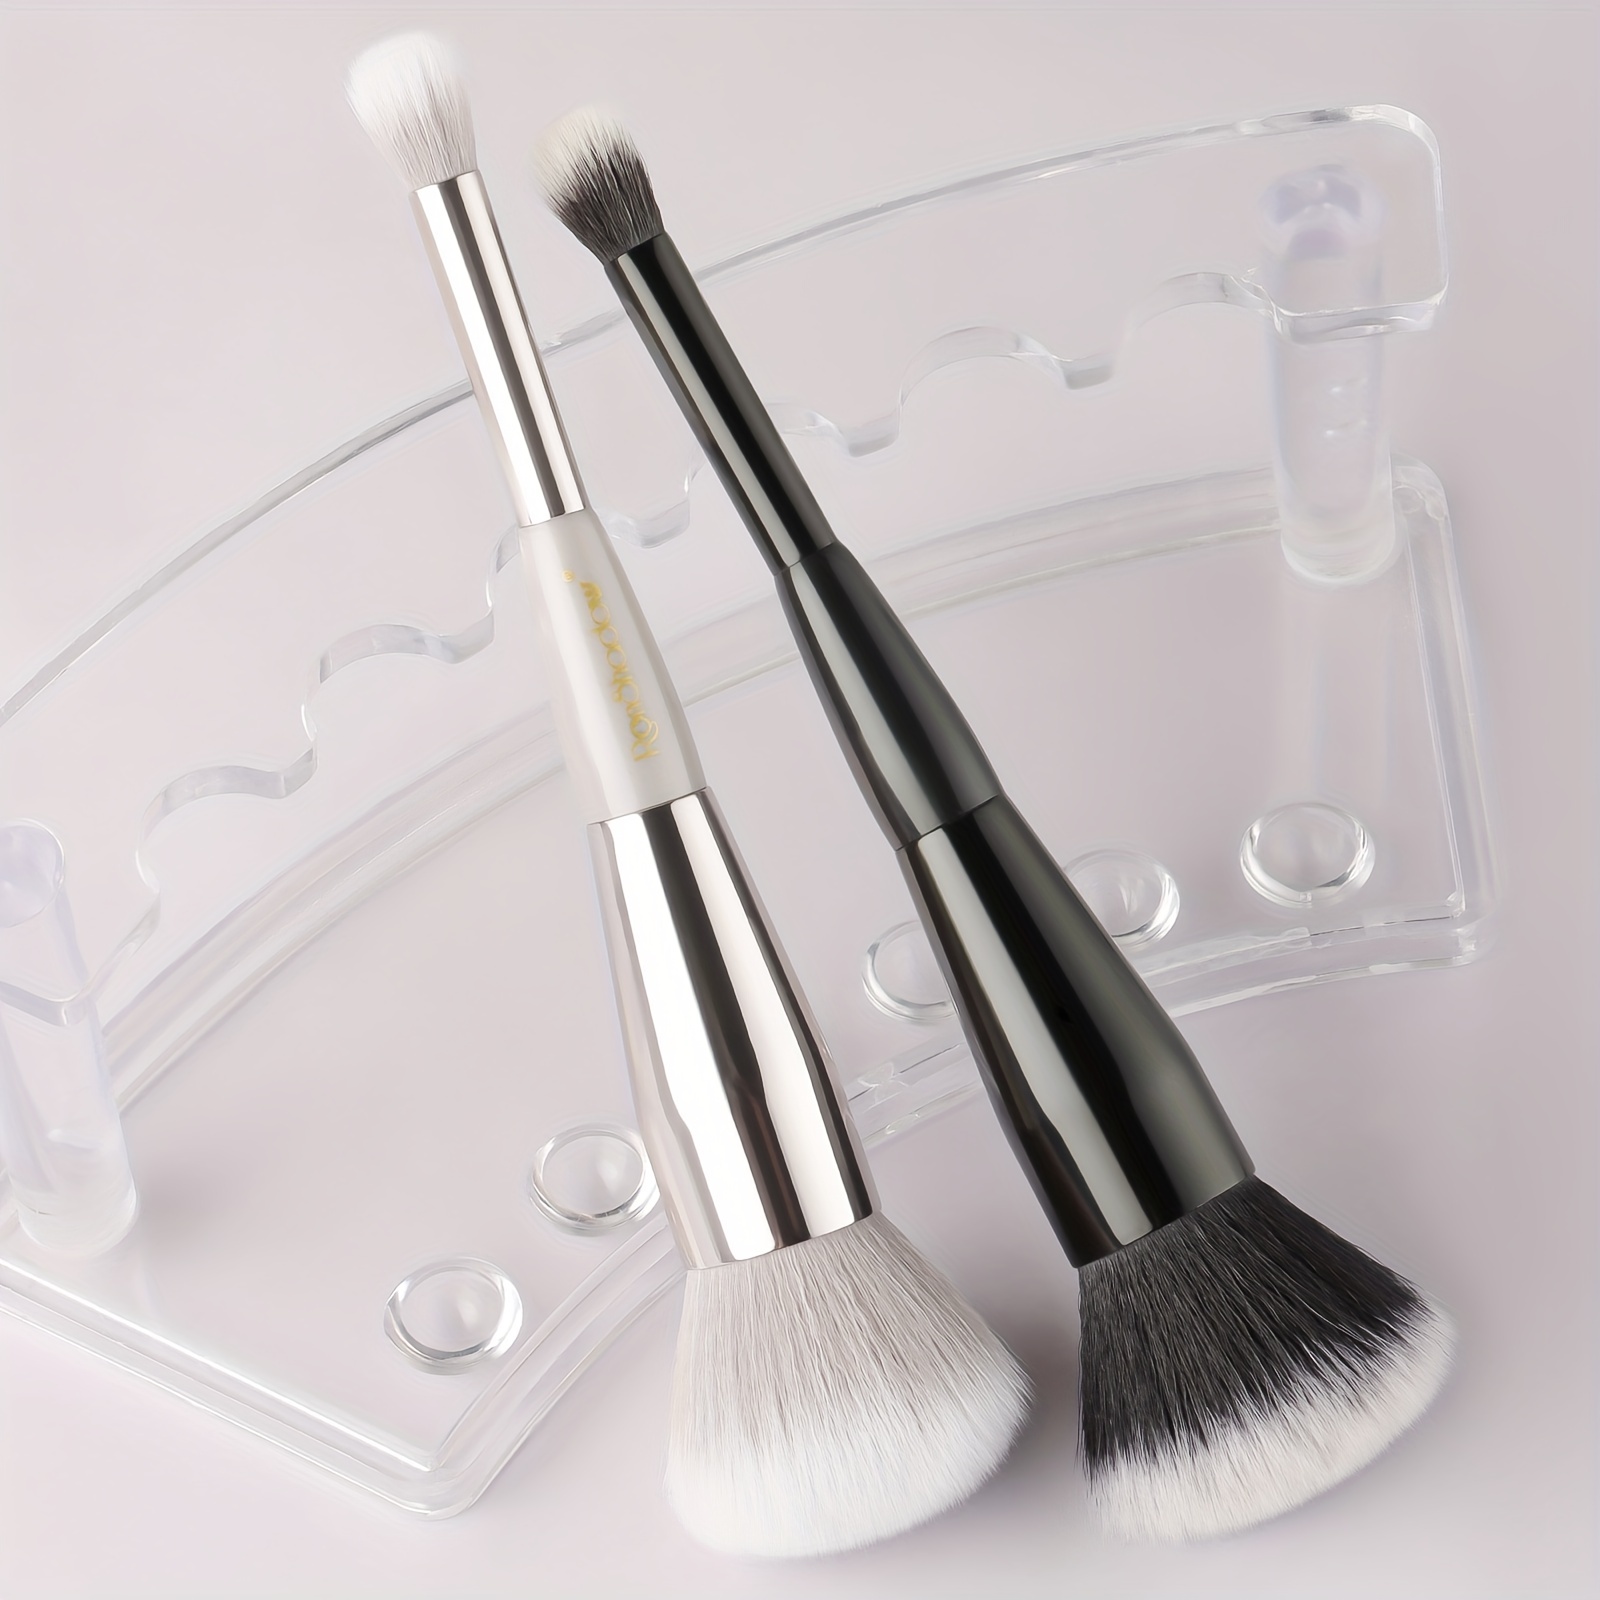 Can you use Cream and Liquid Makeup products with Natural Hair Brushes?